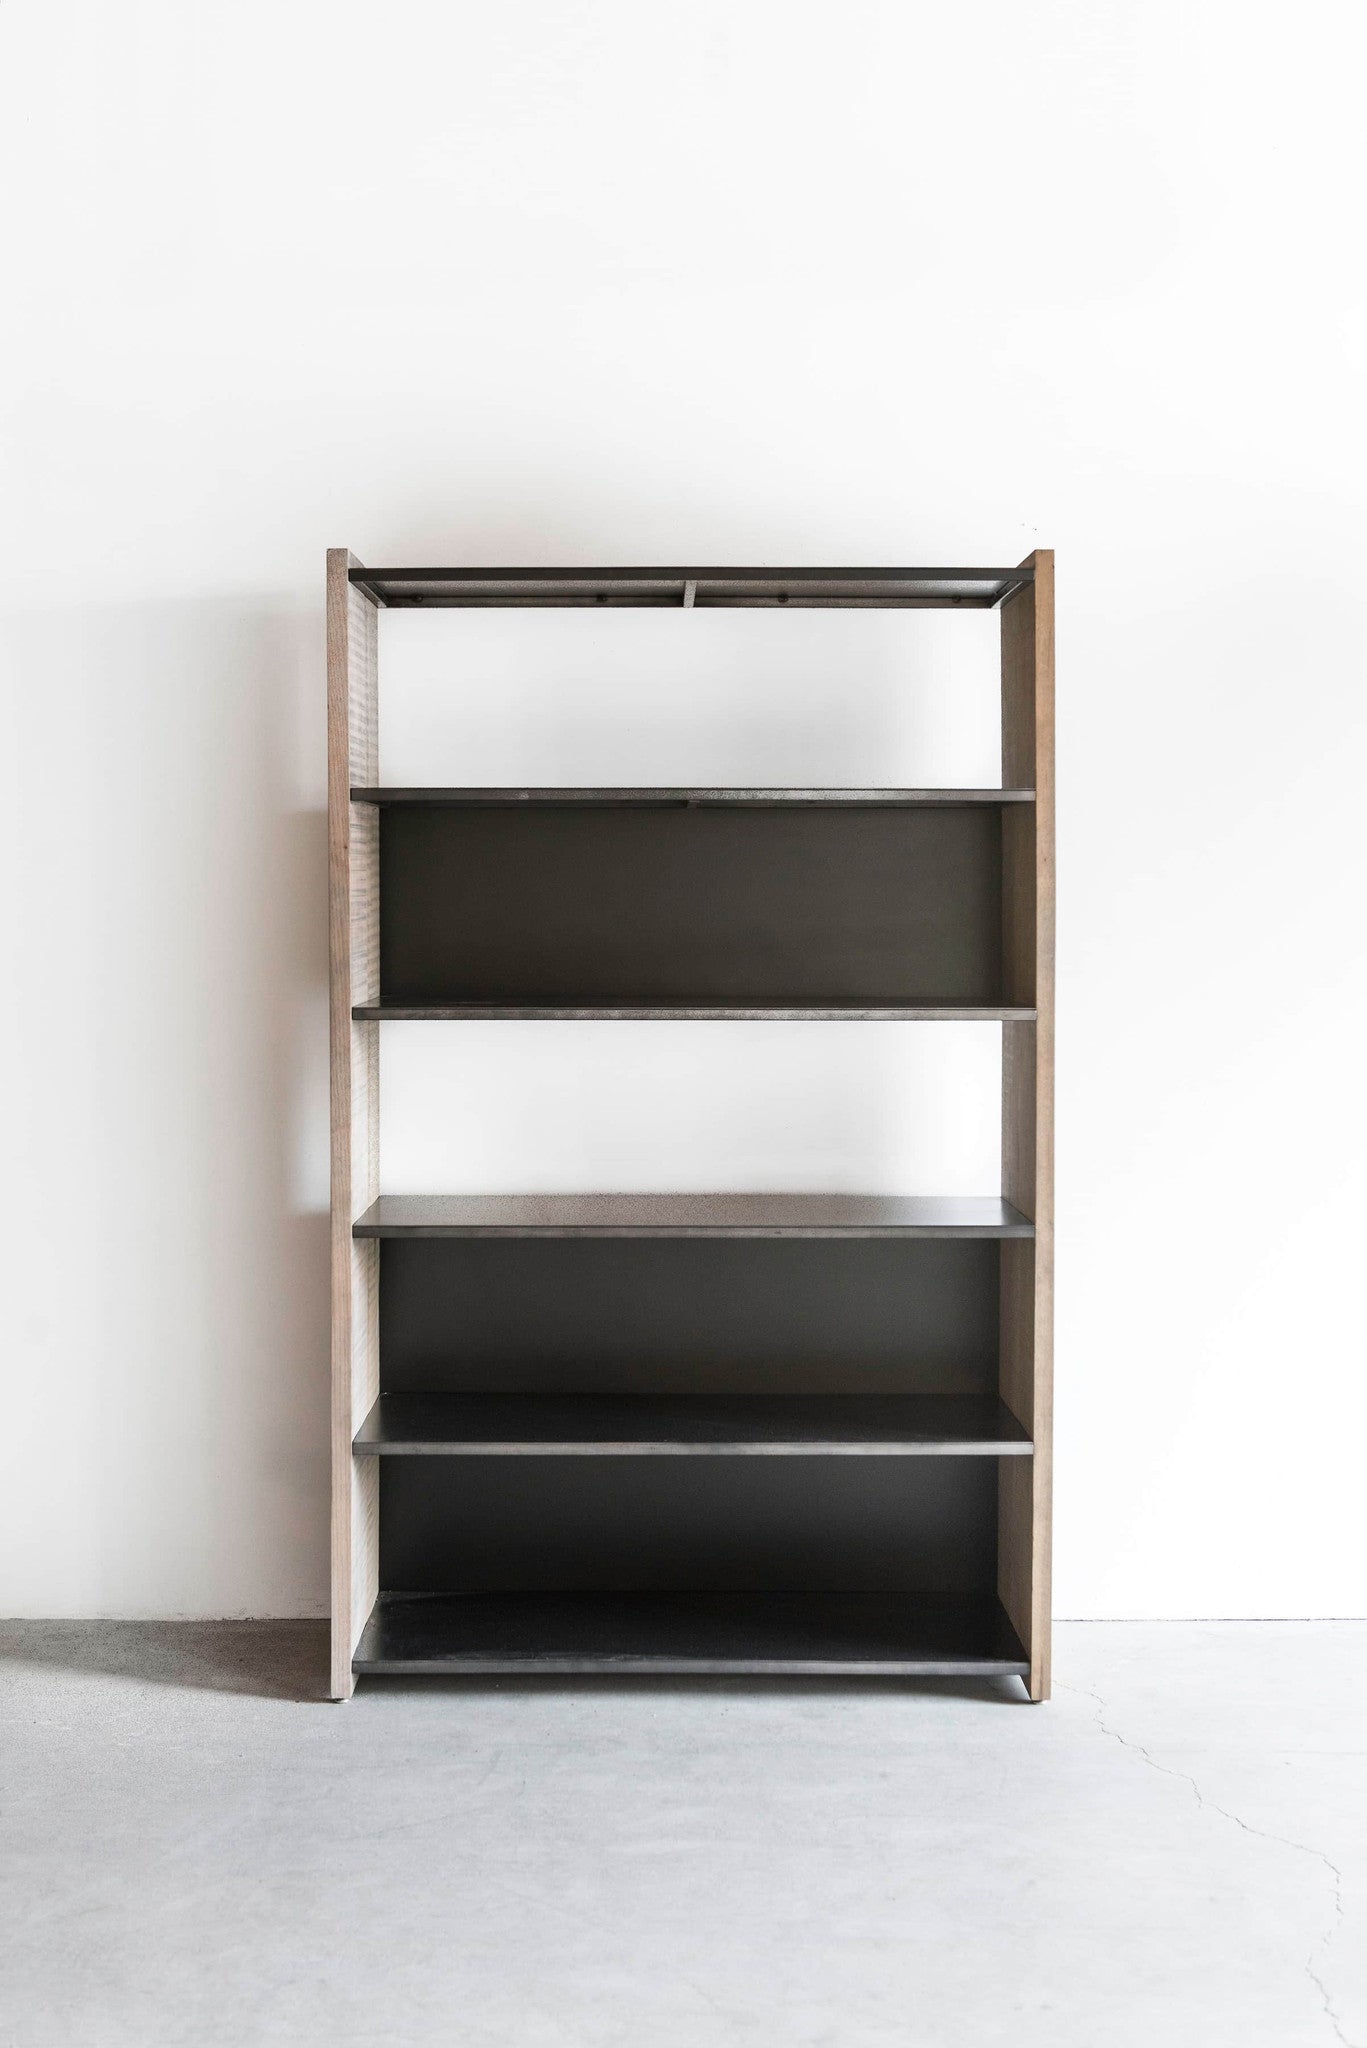 Arden Bookcase- metal and wood bookcase front view